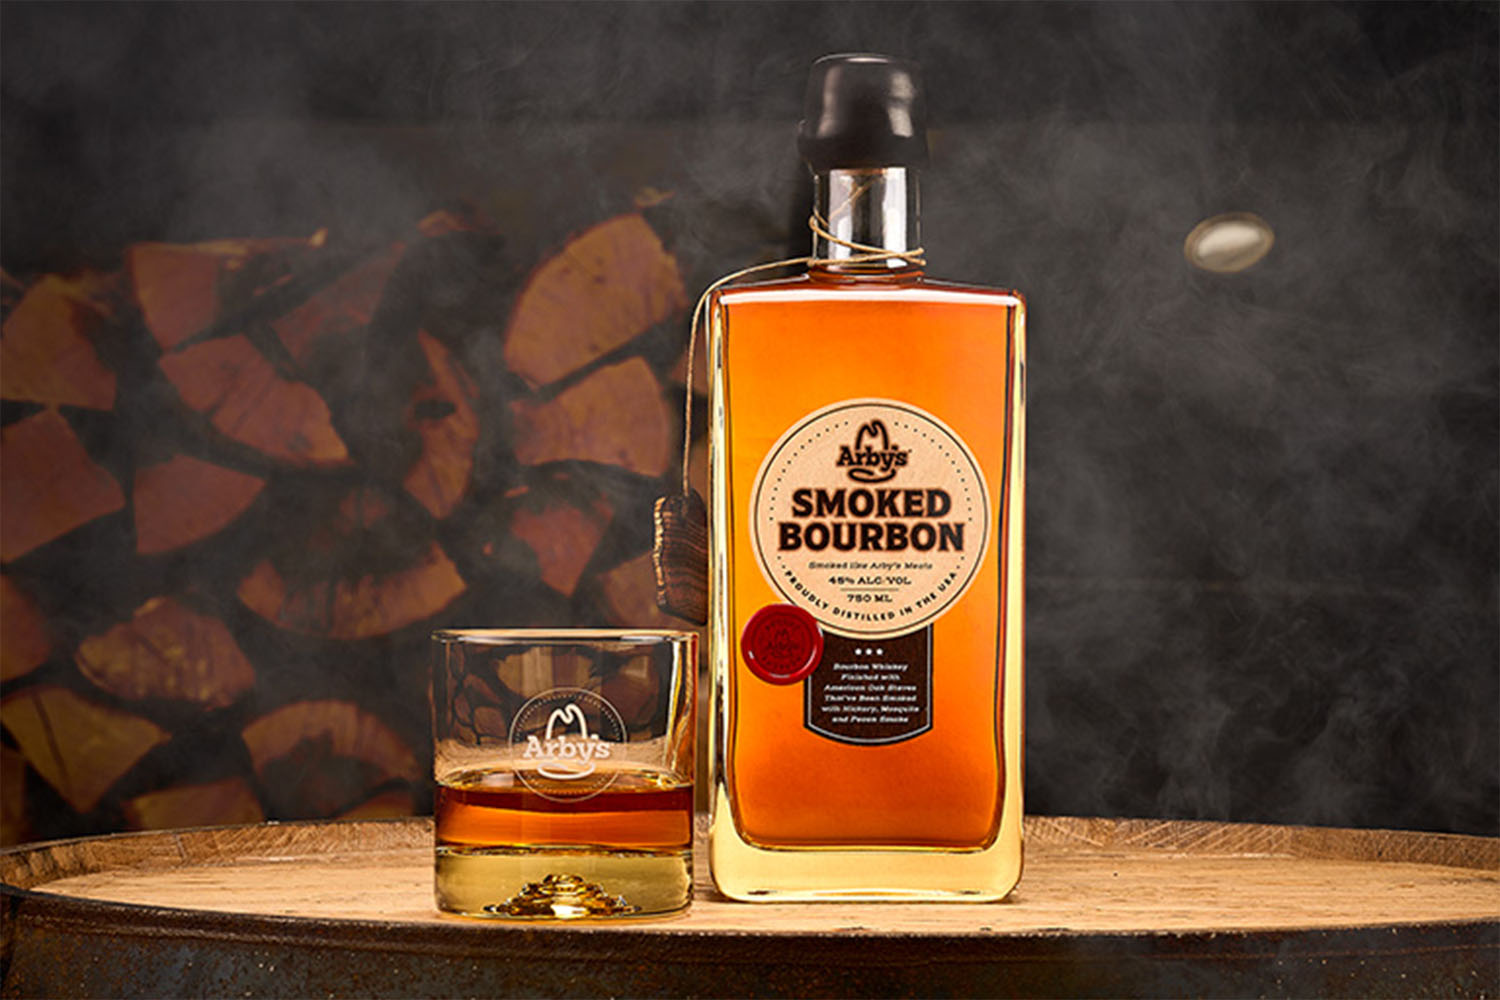 a bottle and glass of Arby's Smoked Bourbon on a wooden table